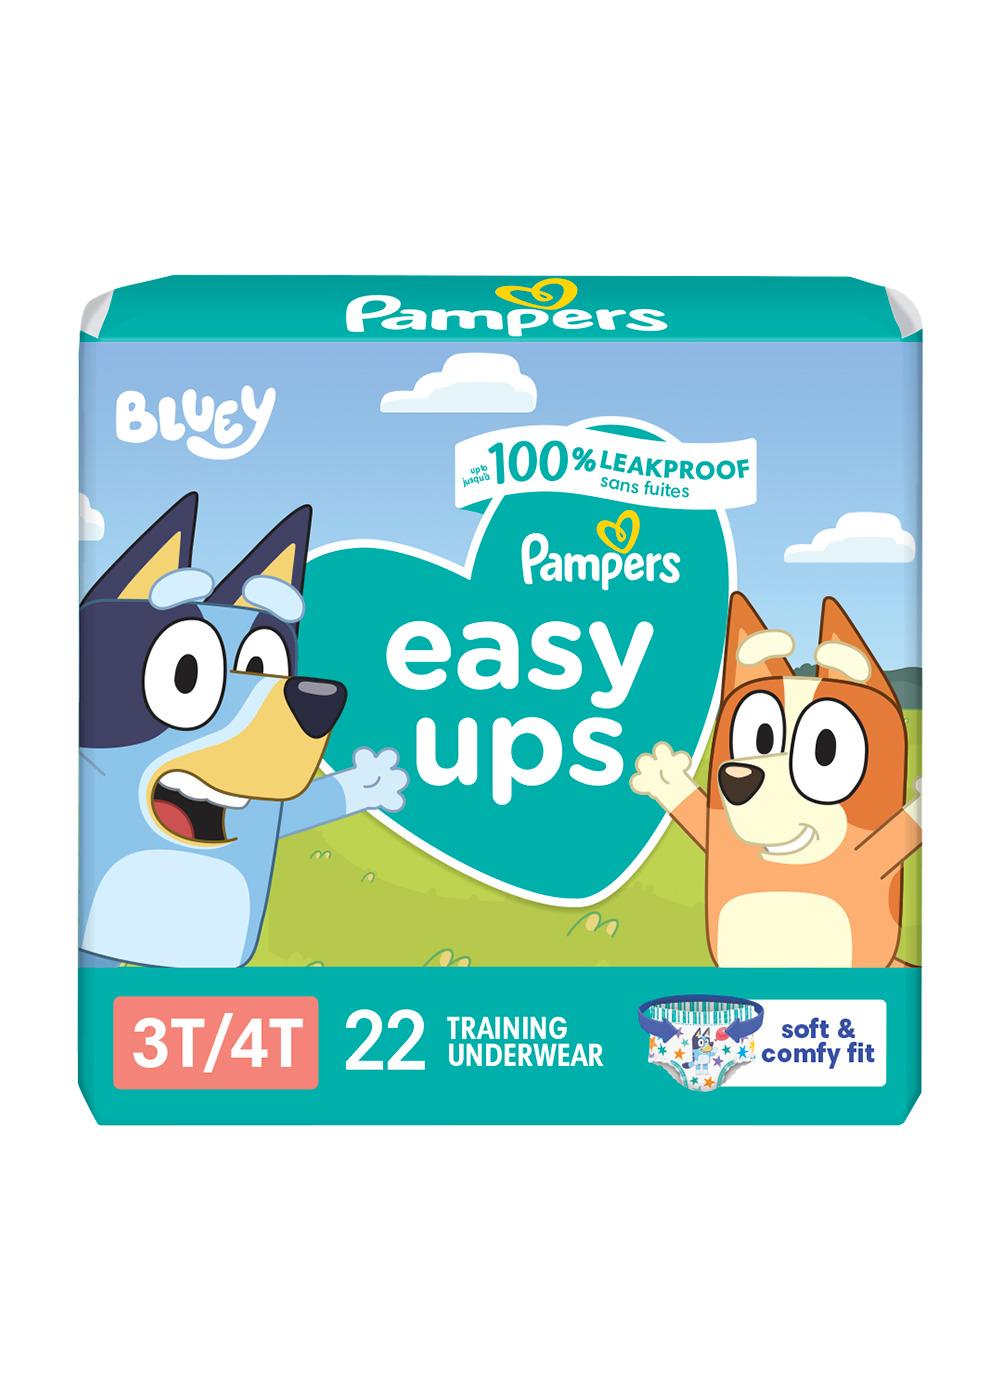 Pampers Easy Ups Boys Training Underwear - 3T - 4T; image 1 of 10